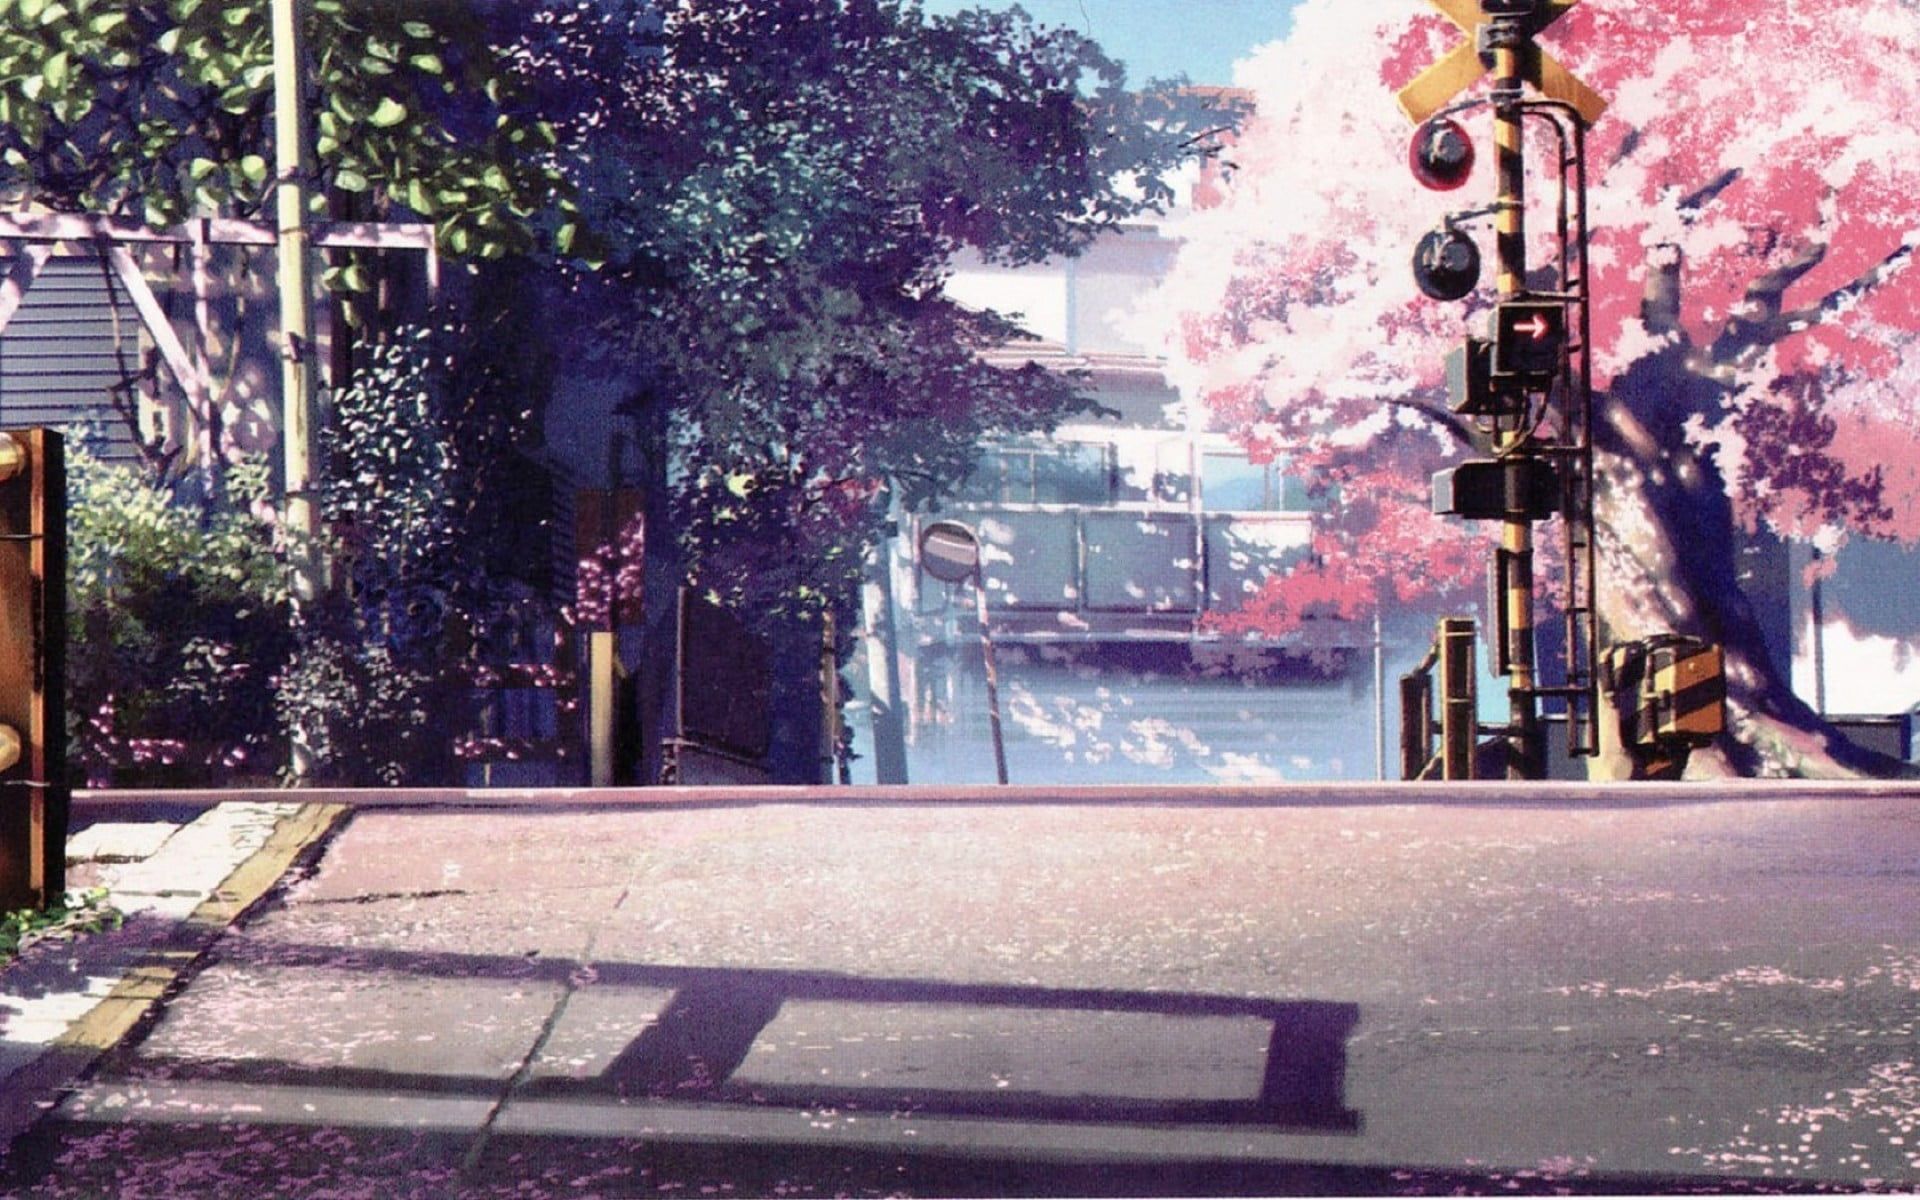 Pink leafed tree, anime, landscape, 5 Centimeters Per Second, urban HD wallpaper